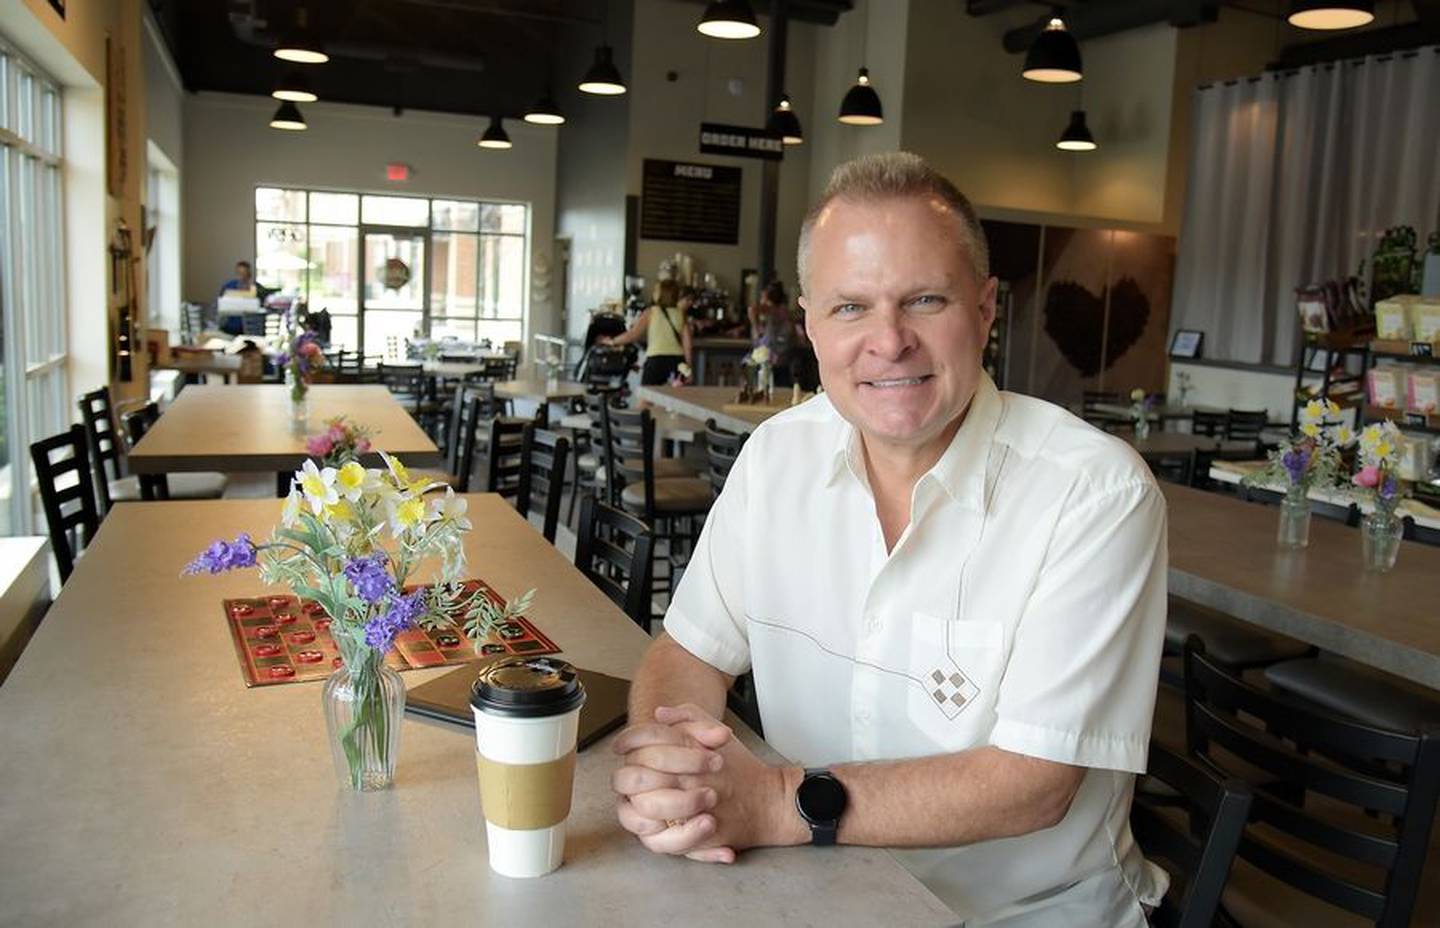 Owner Lance Bell recently closed AJ's Hangout, a low-carb, gluten-, soy- and sugar-free restaurant in South Elgin, to rebrand as AJ's Java Joint. Bell says it's the first sugar-free coffee shop in America.